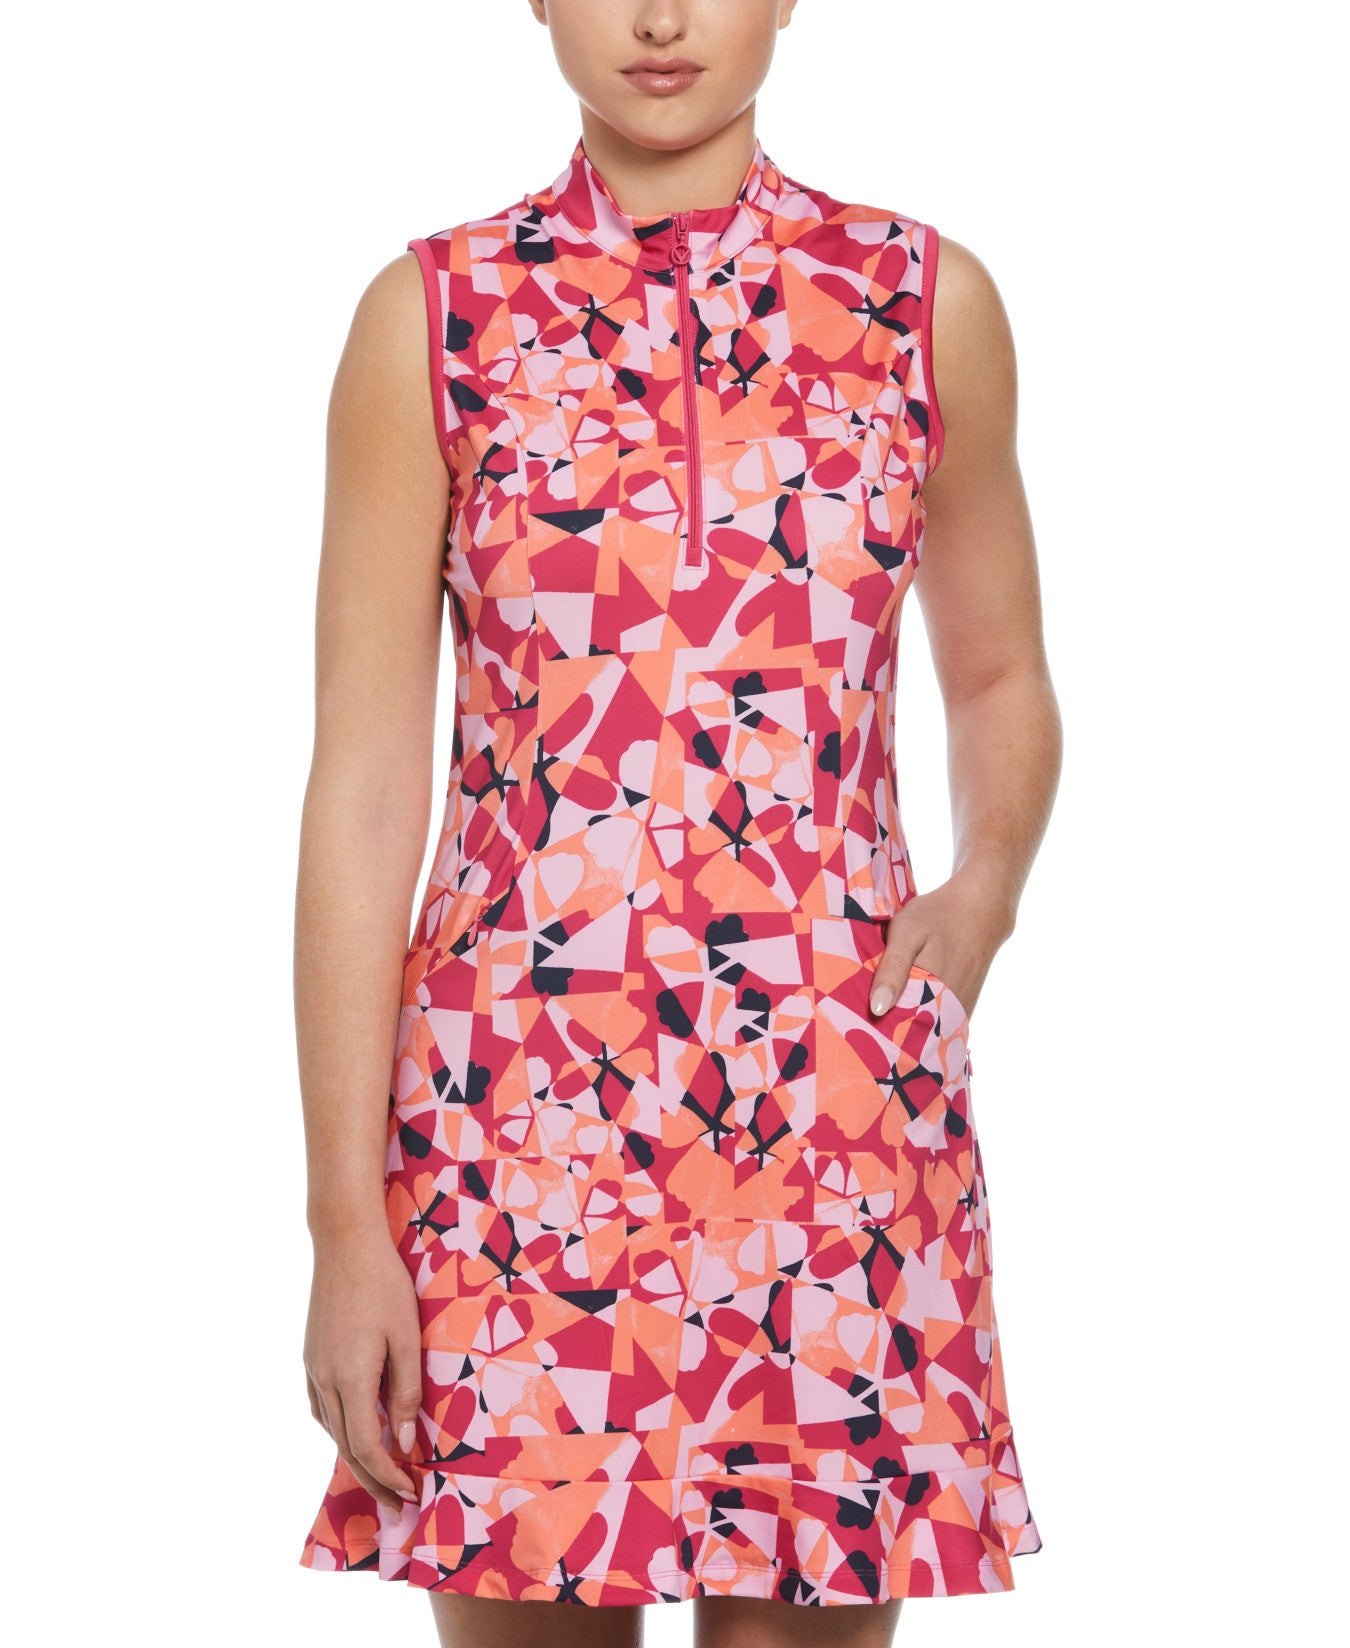 View Womens Geometric Floral Print Flounce Golf Dress In Pink Peacock information